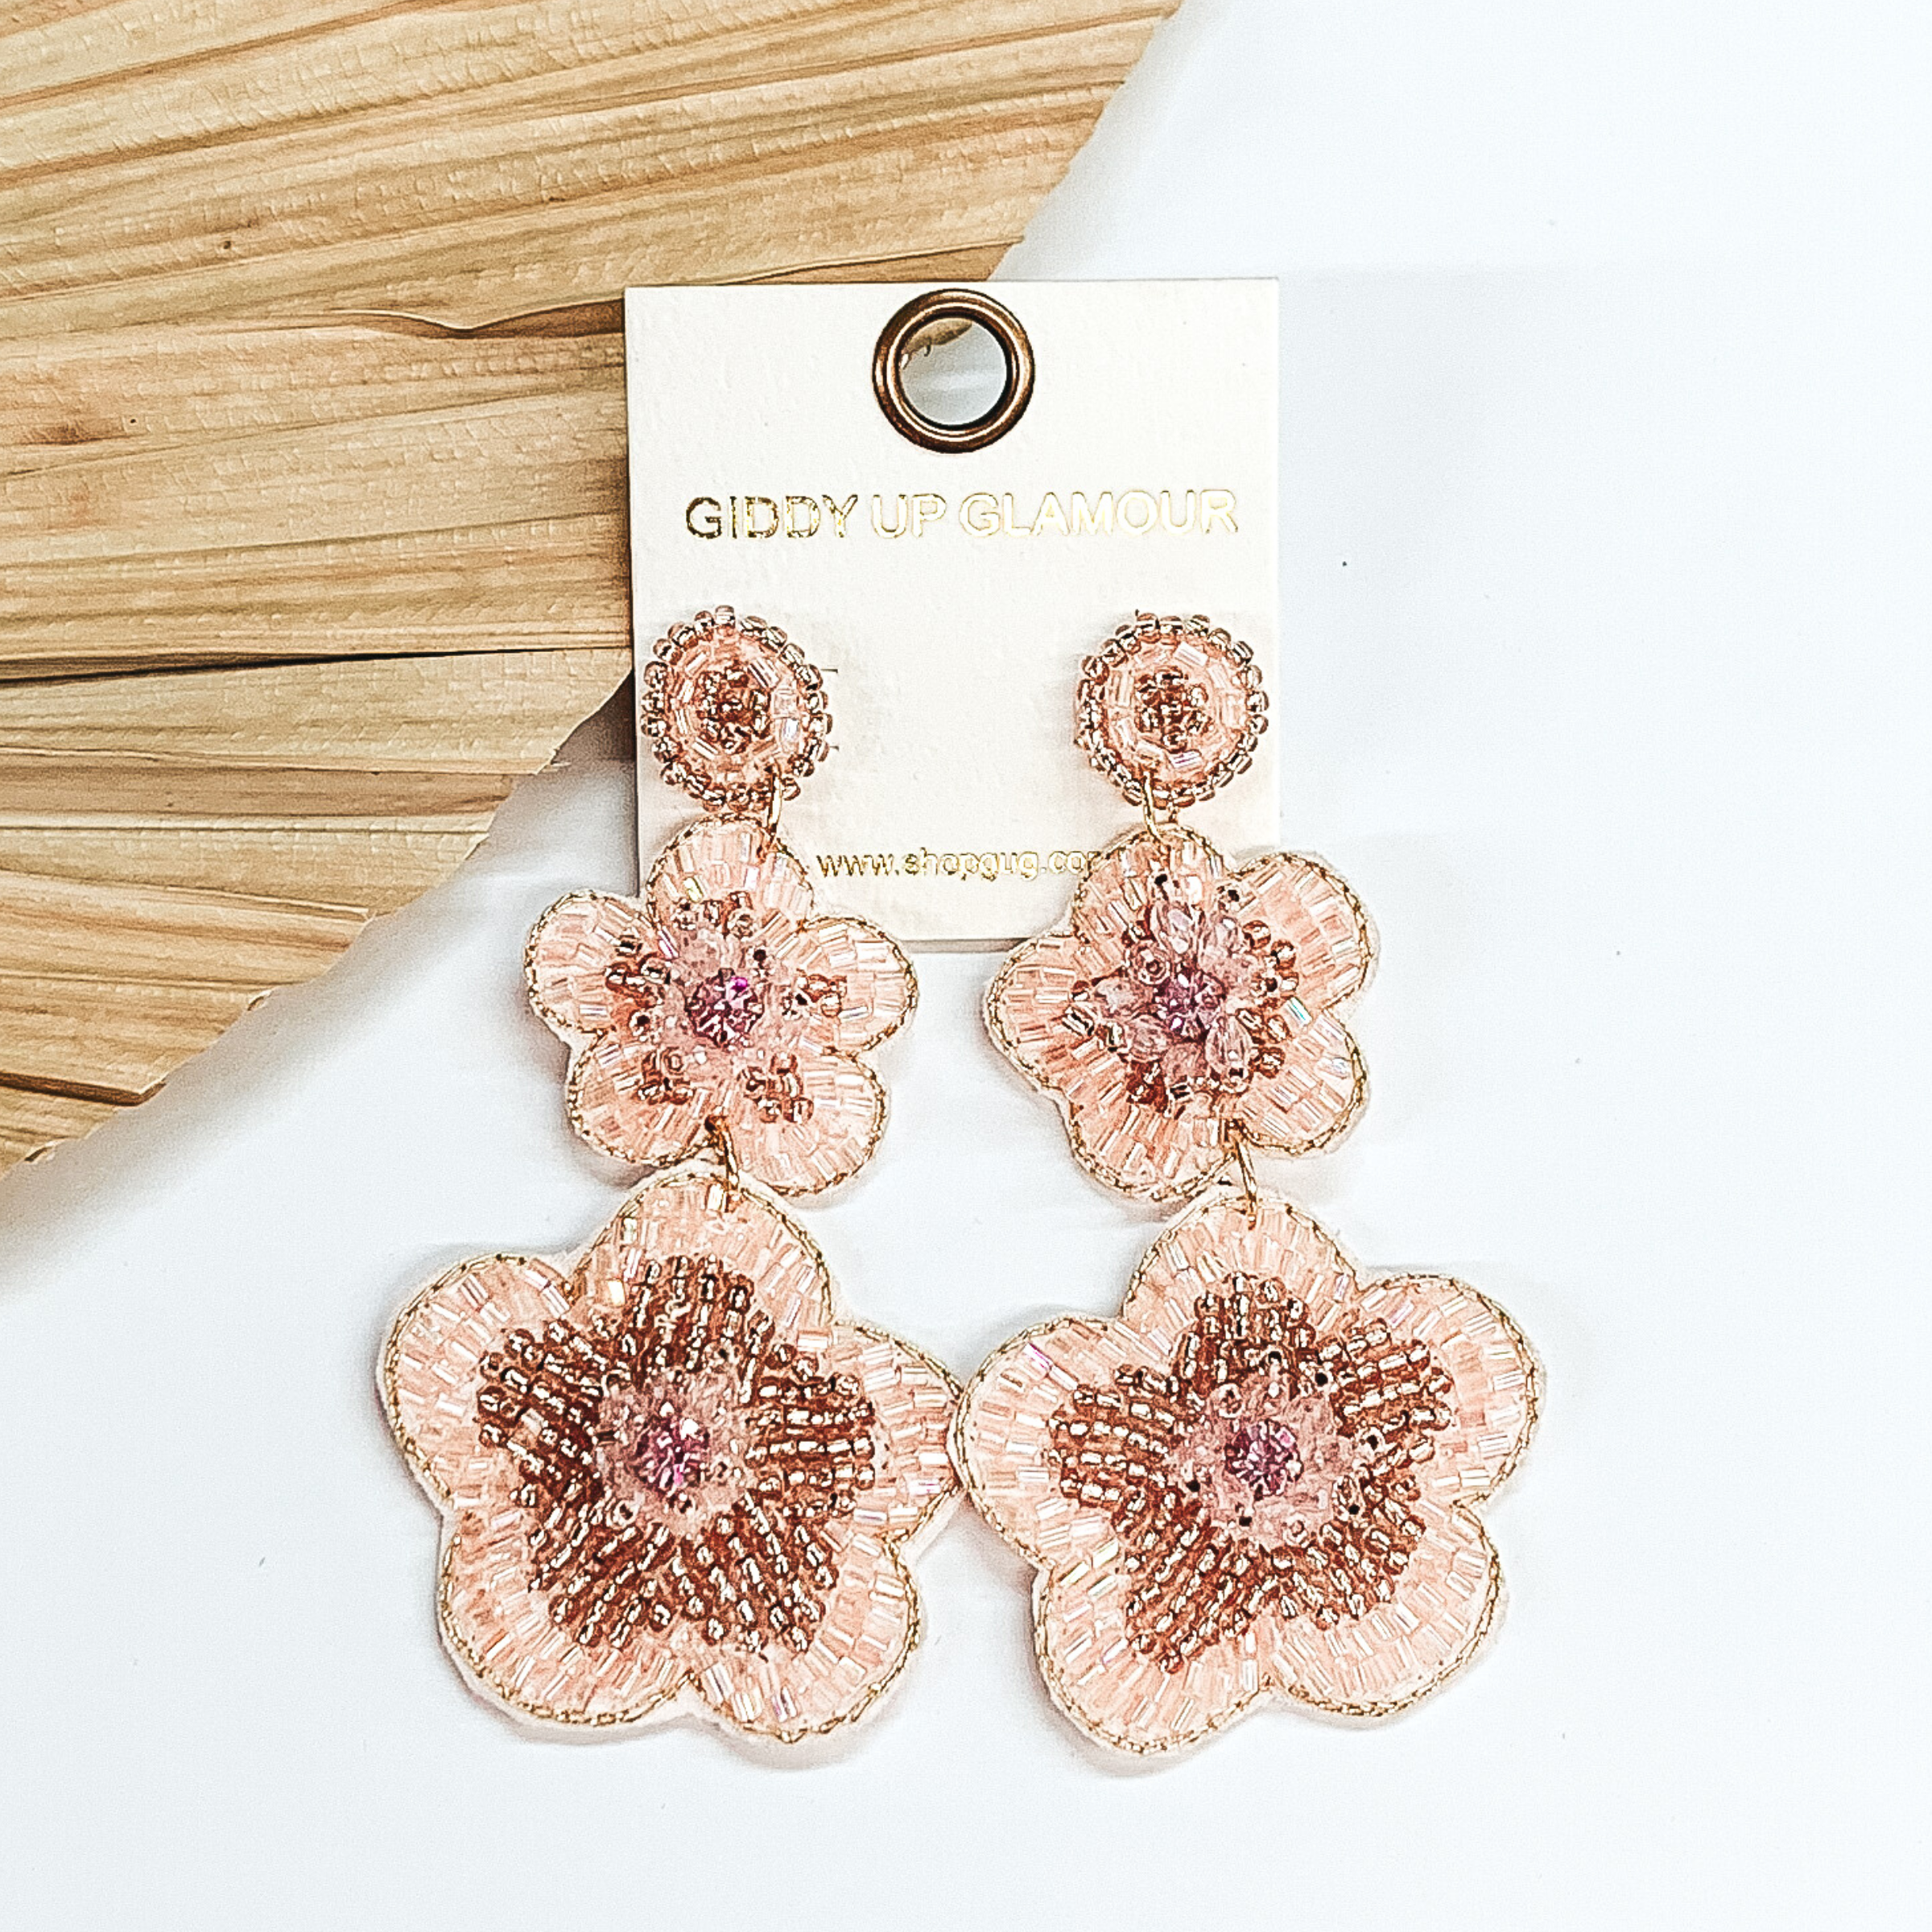 Gold beaded circle post back earrings. There is a two hanging beaded flower pendant from the gold stud earrings. The flower pendants are light pink with a rose gold outline and detailing. These earrings are pictured on a white background with a dried palm leaf in the background. 